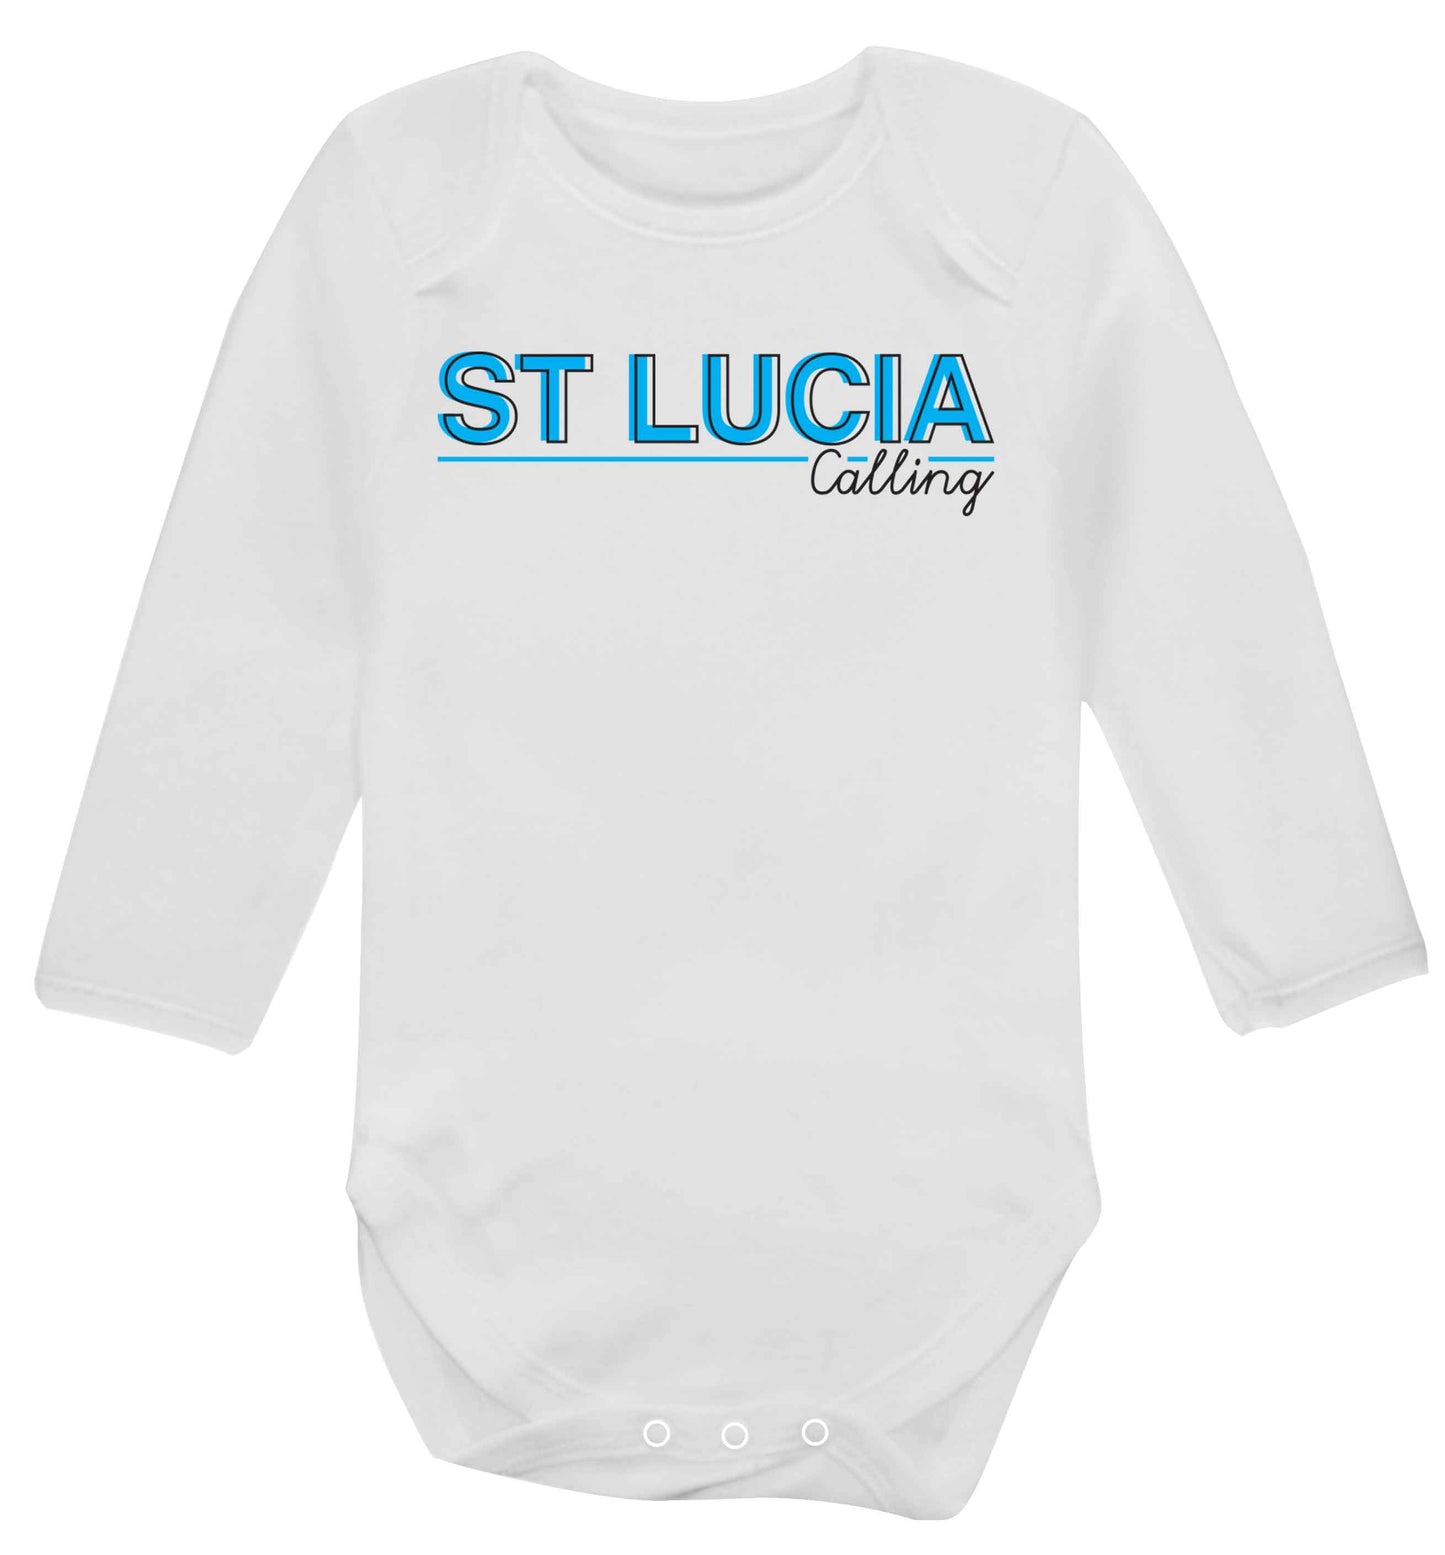 St Lucia calling Baby Vest long sleeved white 6-12 months